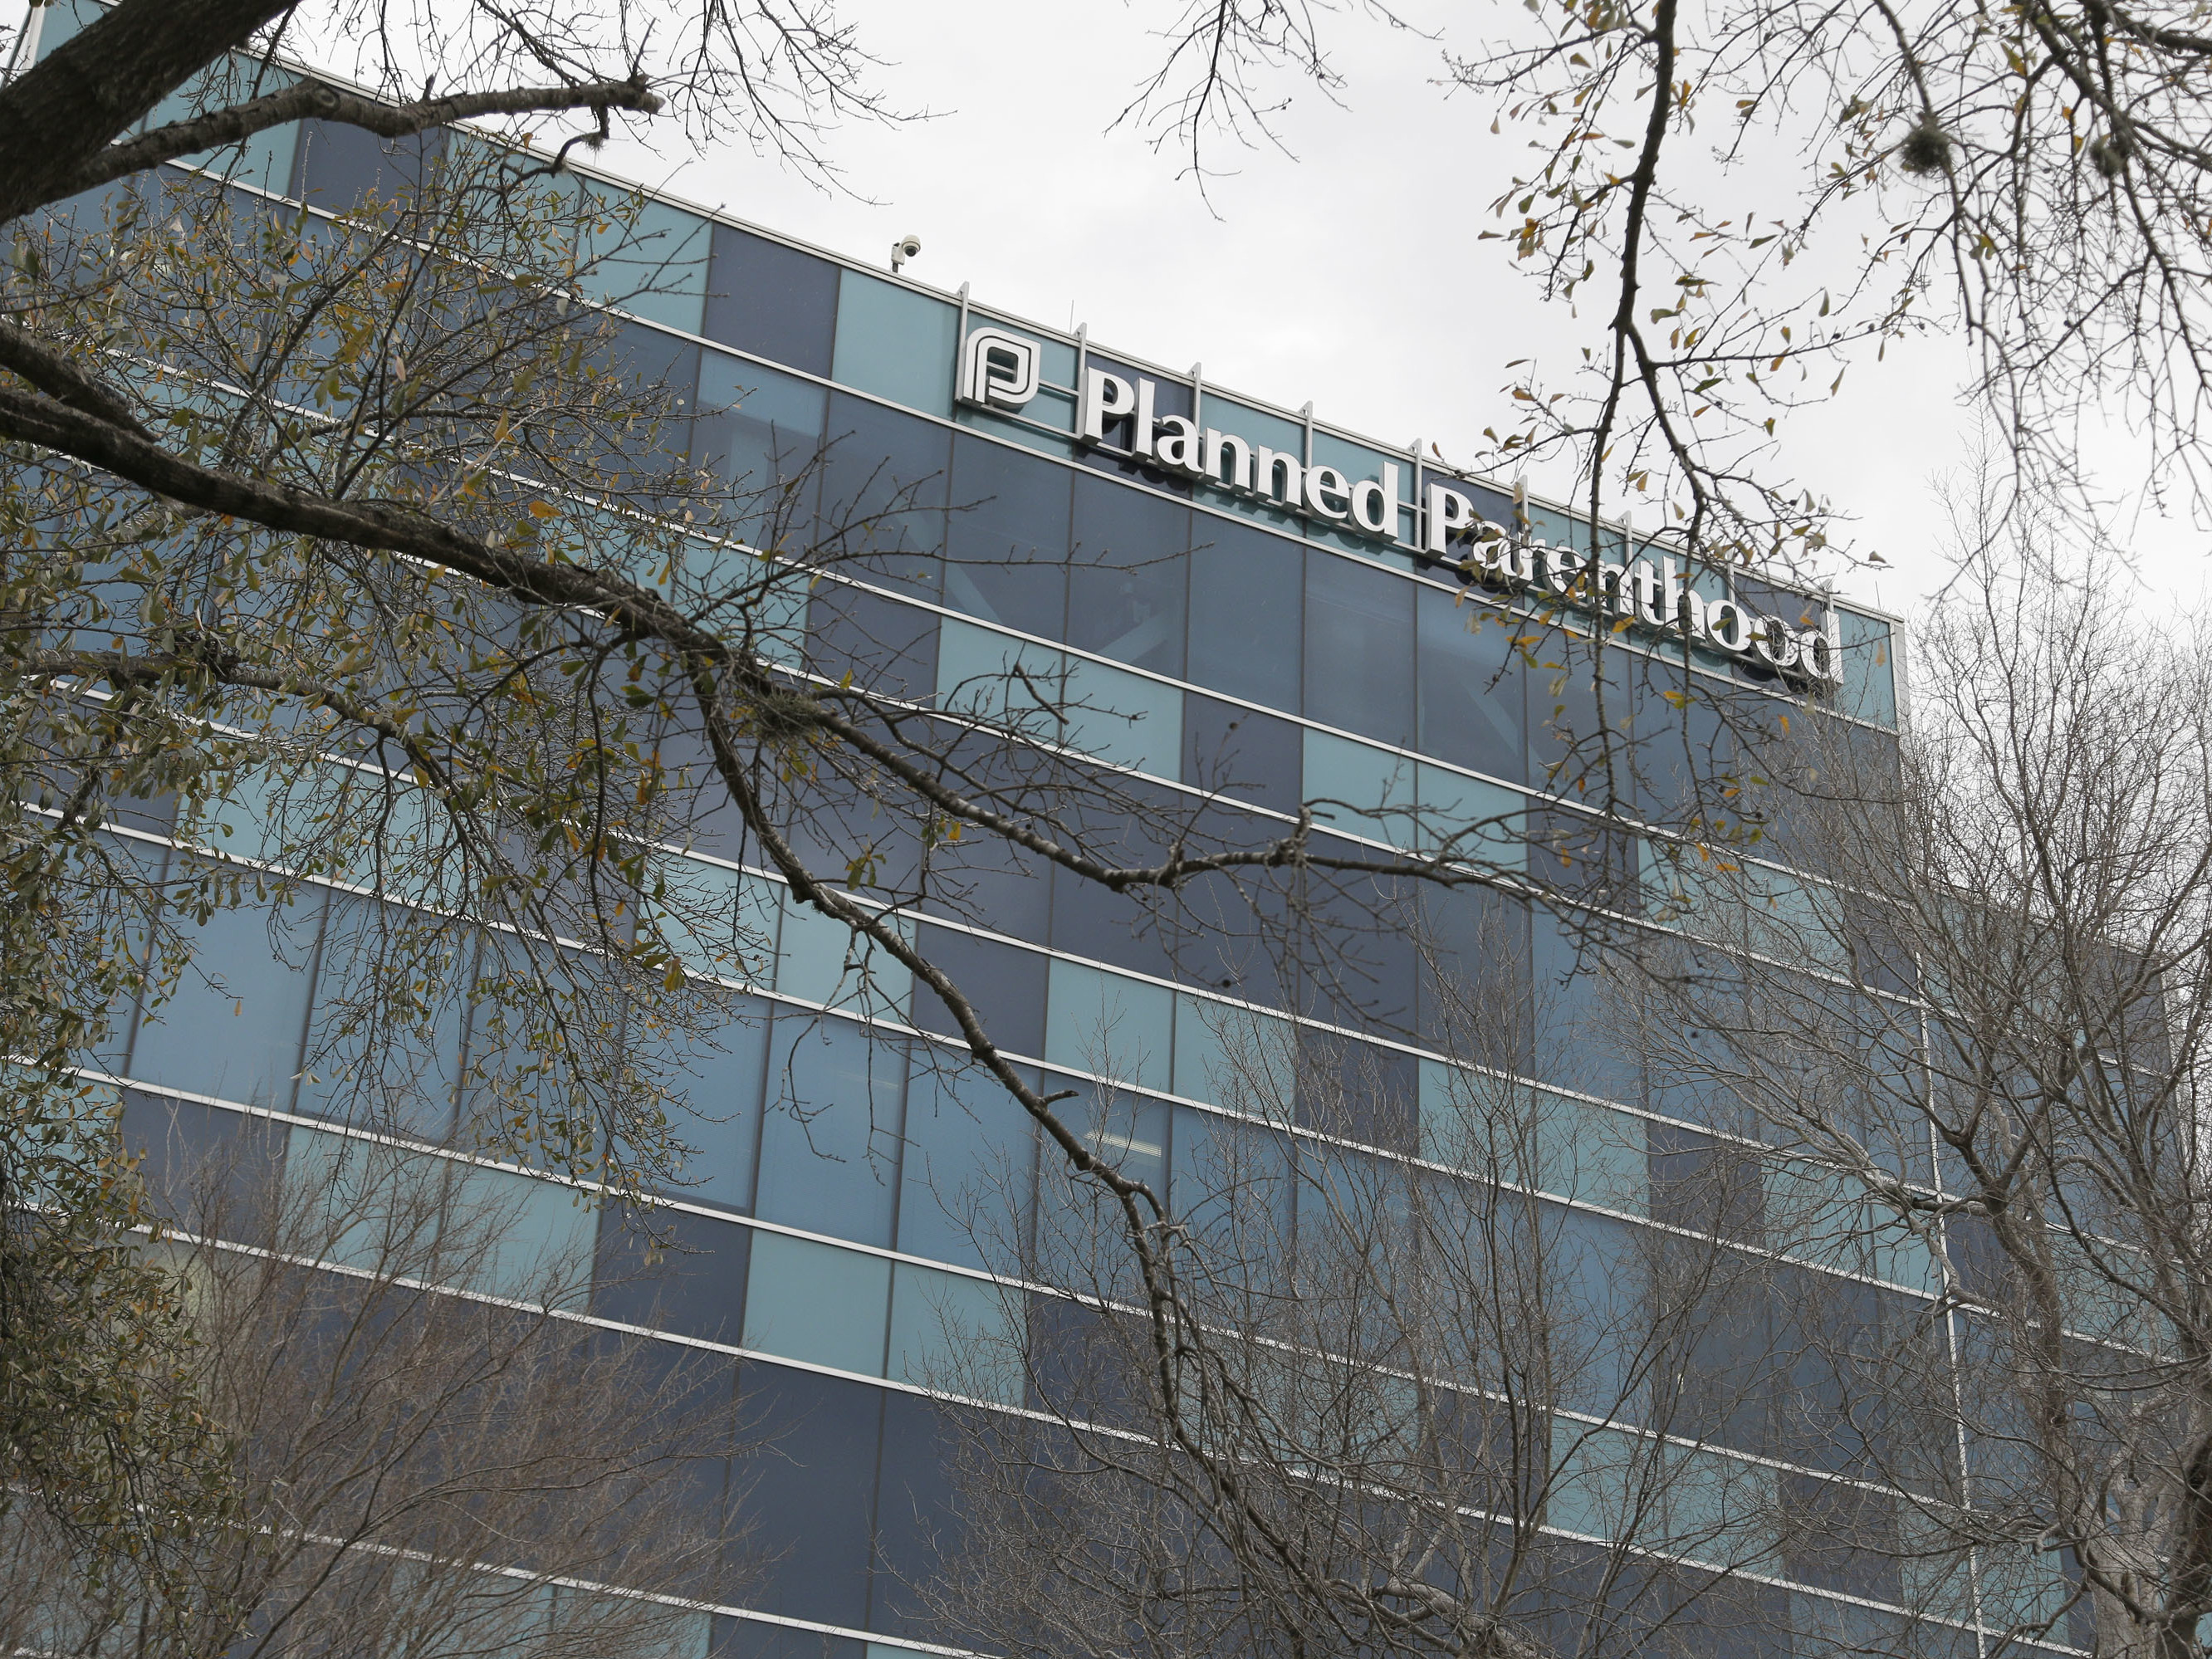 A Planned Parenthood clinic in Houston. A Houston grand jury investigating undercover footage at the Houston clinic found no wrongdoing by the abortion provider, and instead indicted anti-abortion activists involved in making misleading videos about the handling of fetal tissue.